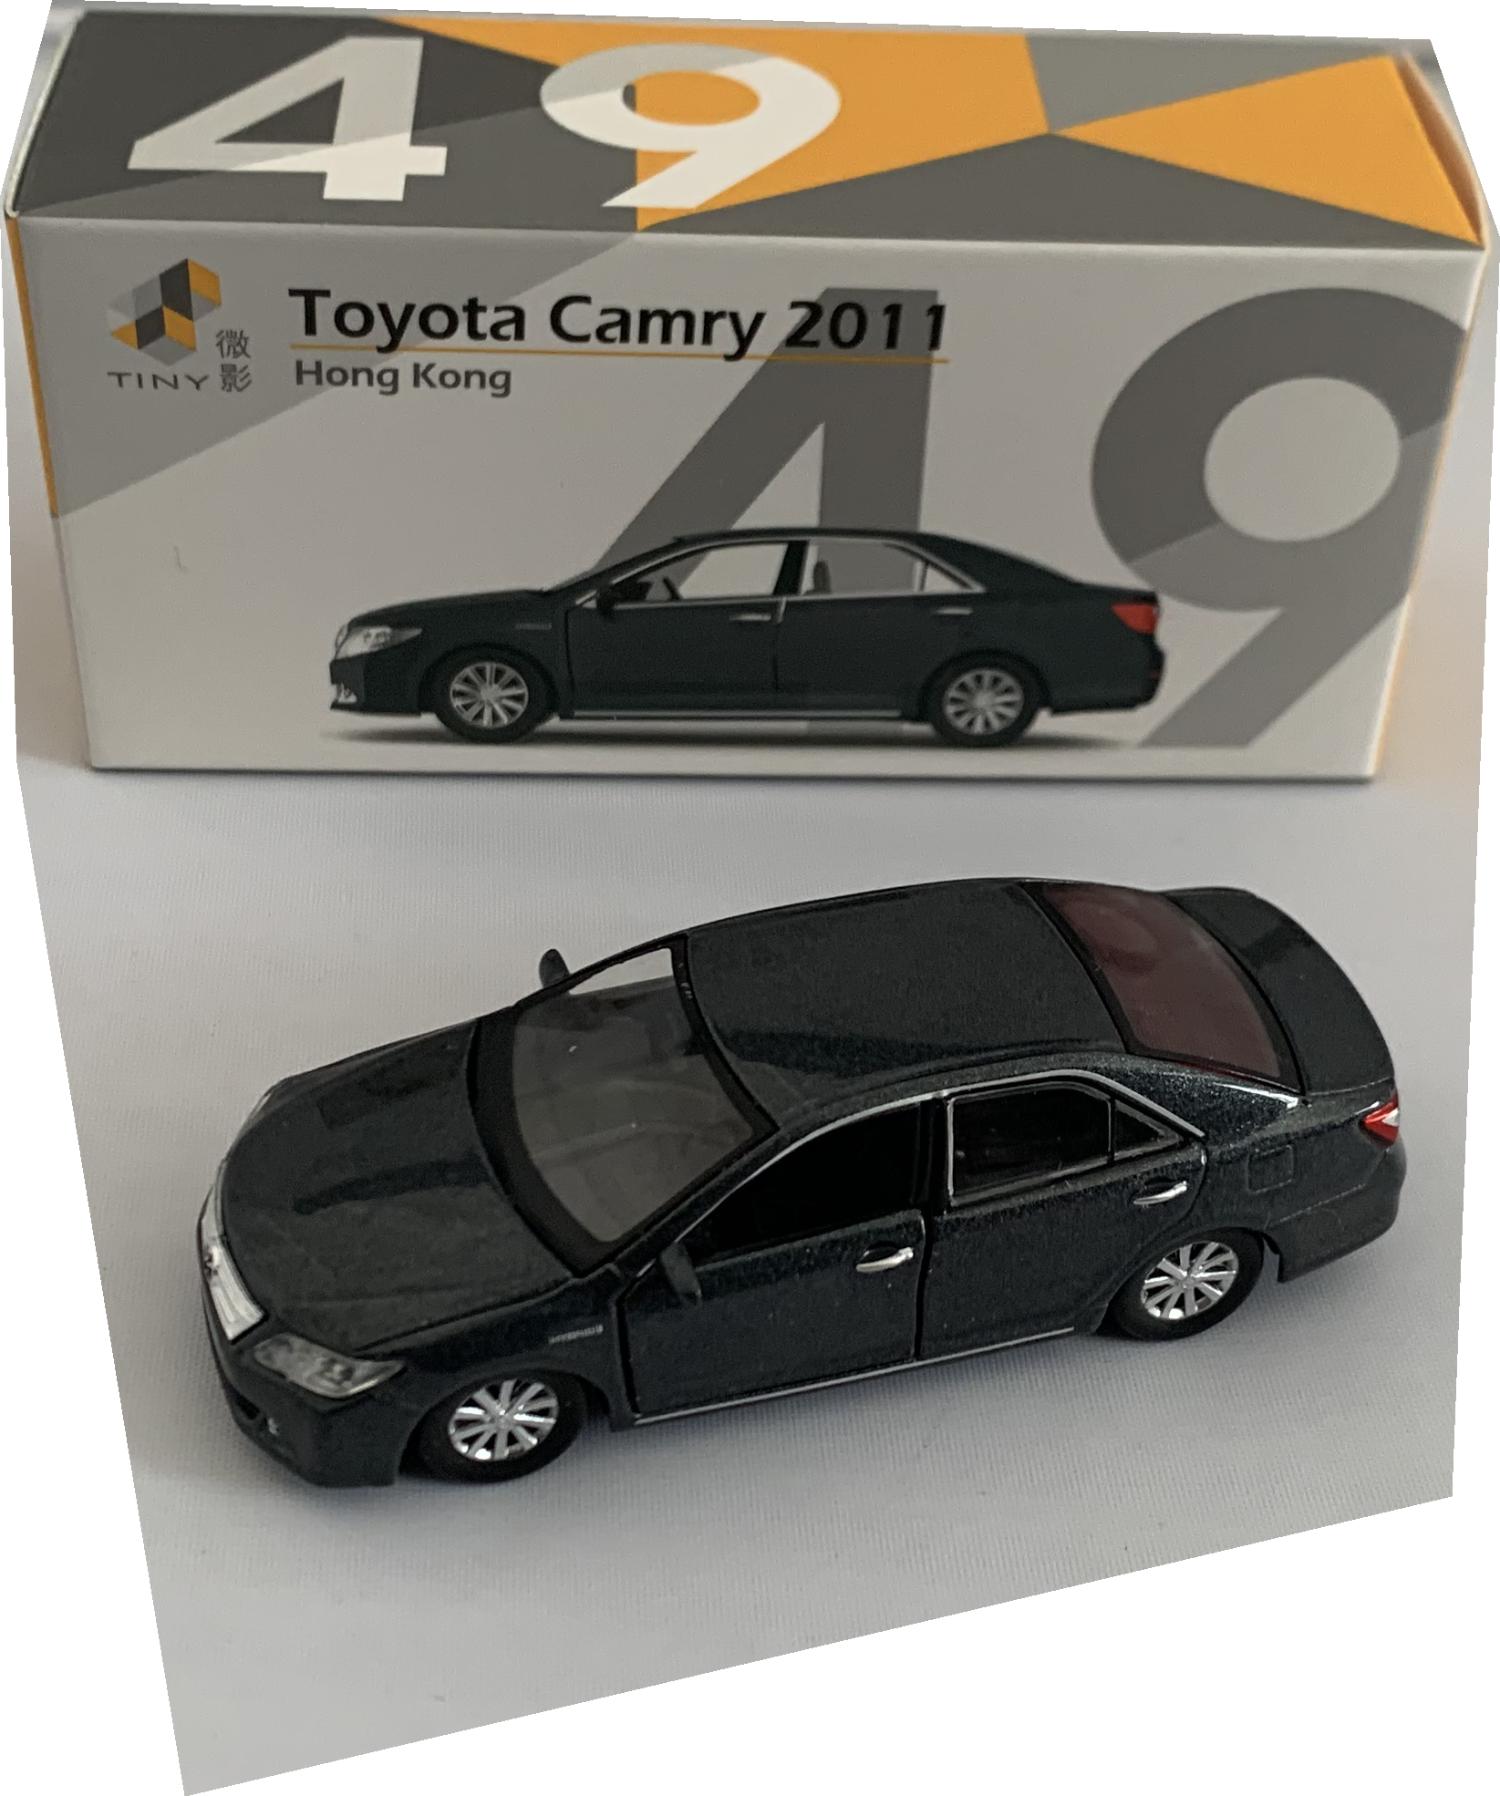 A good reproduction of the Toyota Camry with detail throughout, all authentically recreated.  The model is presented in a box, the car is approx. 6 cm long and the box is 10 cm long